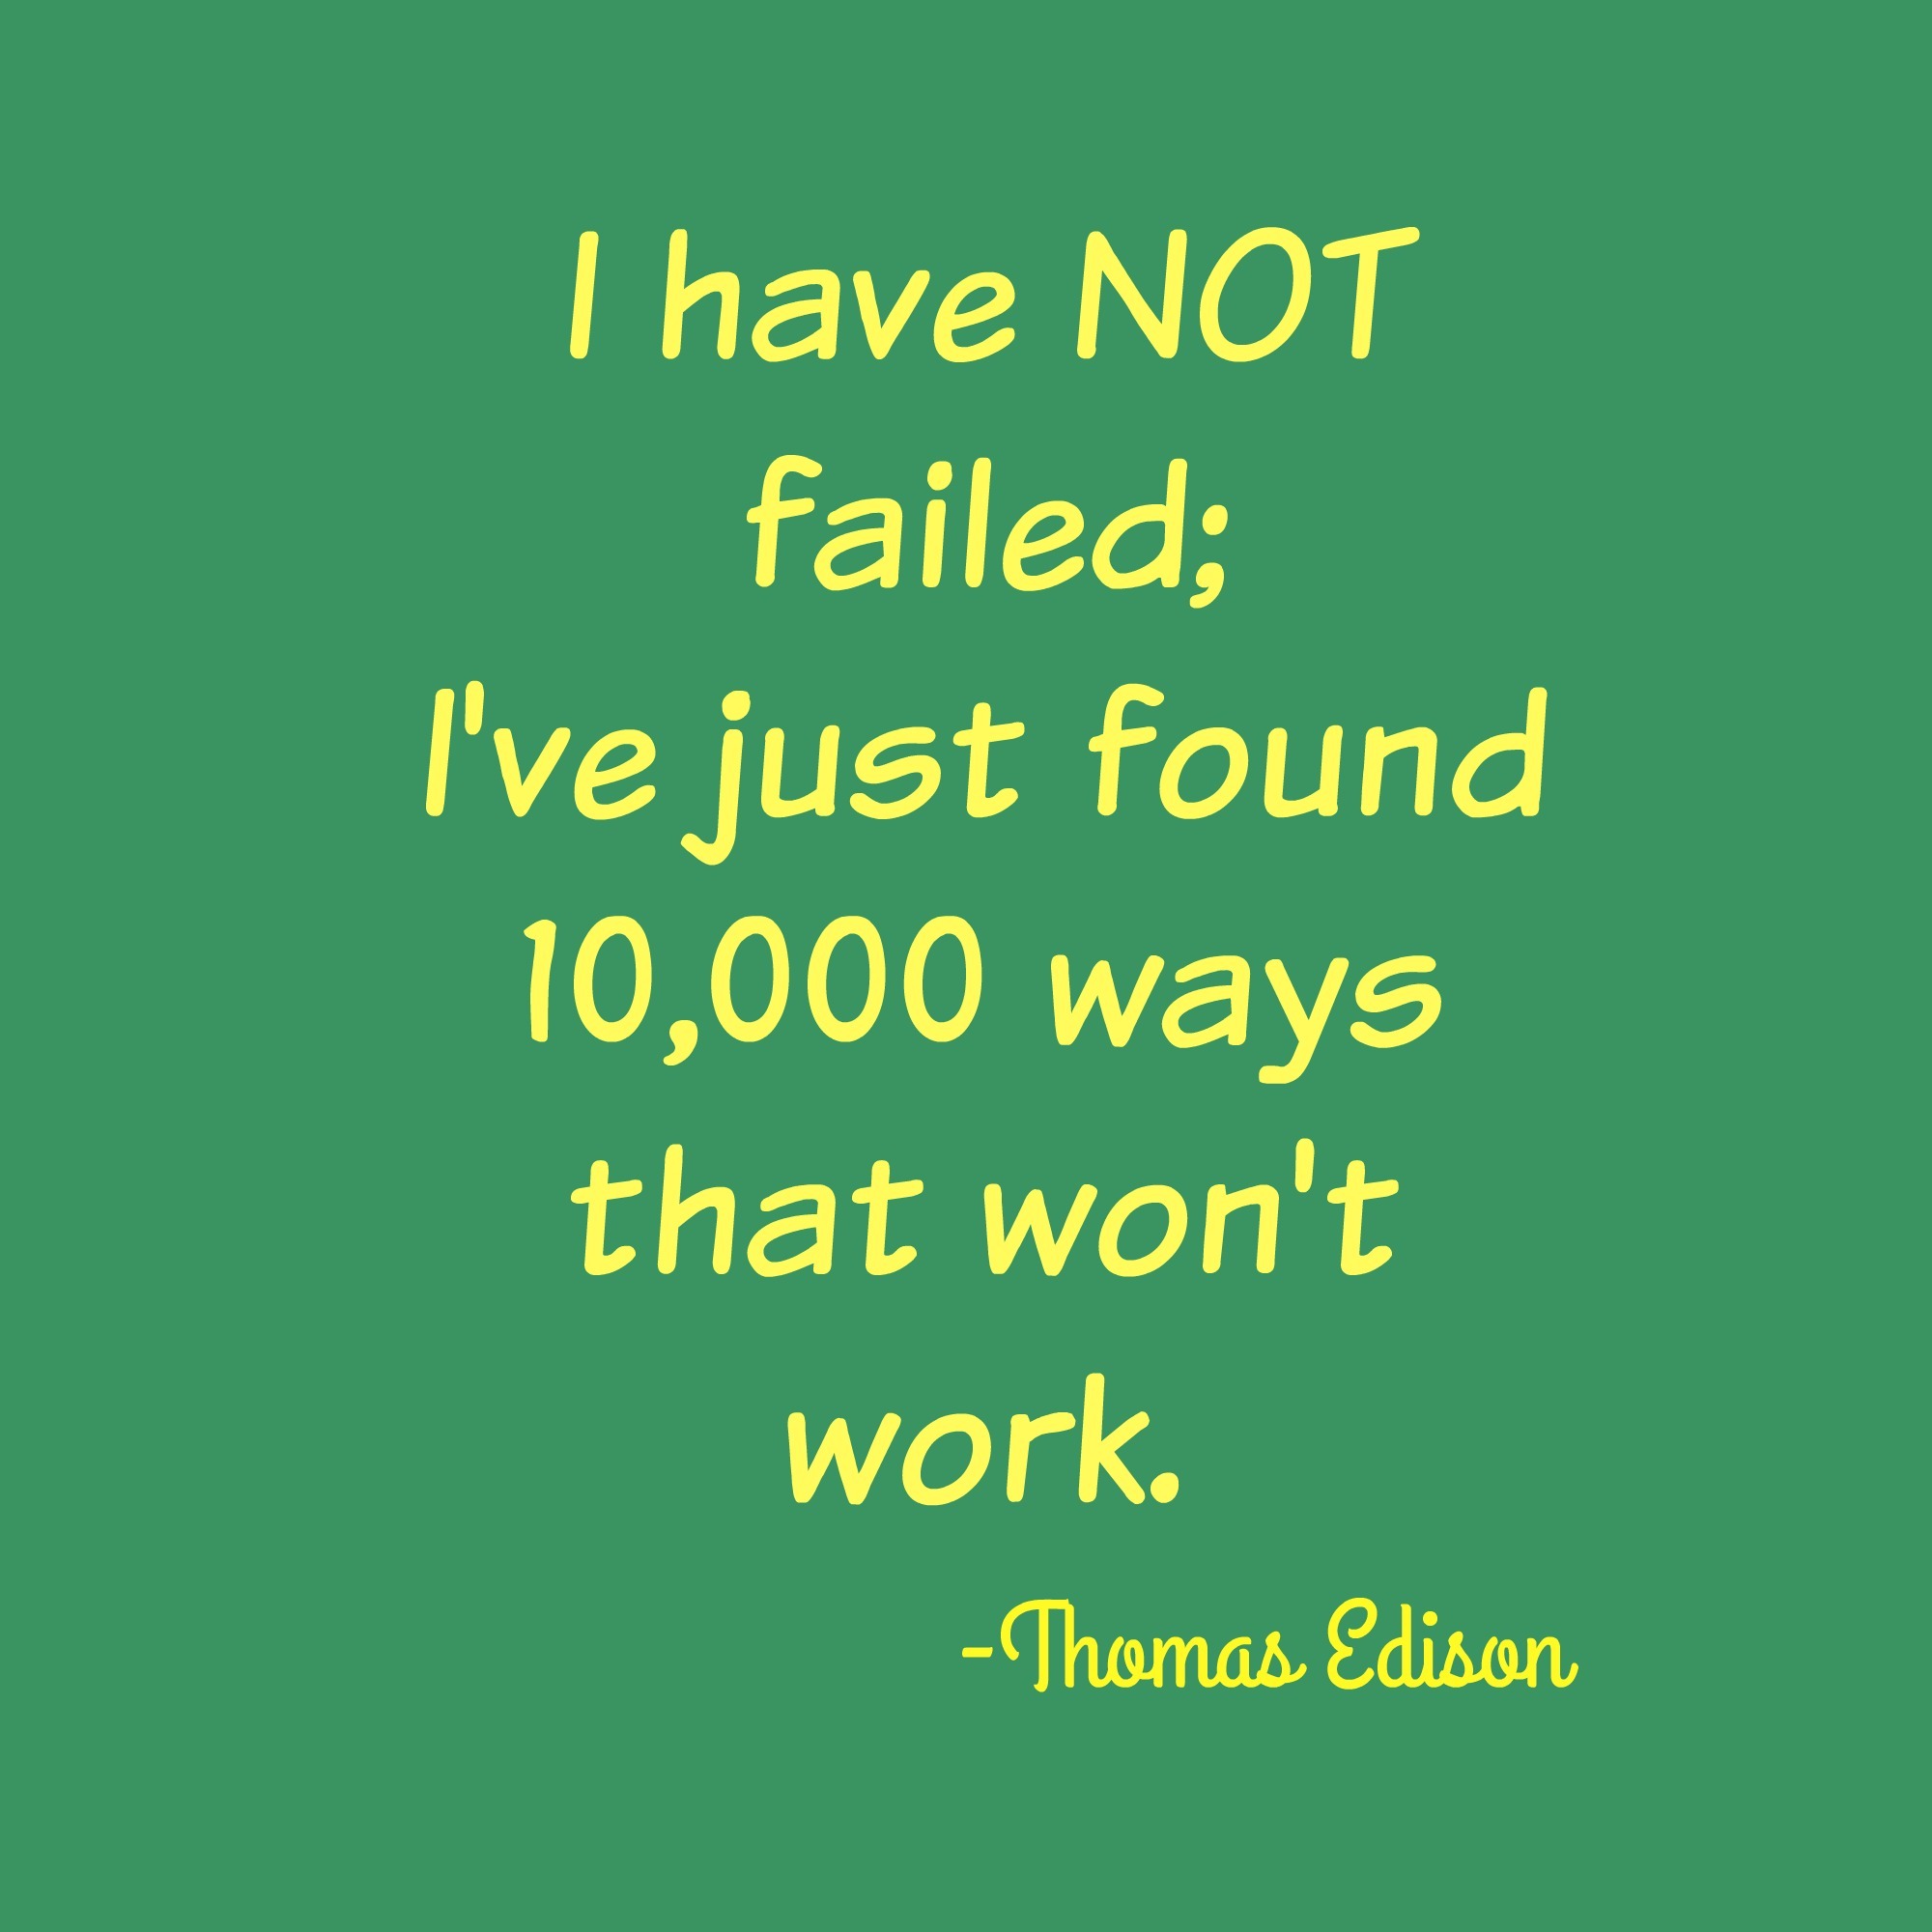 I have not failed, I have just found 10,000 ways that don't work.